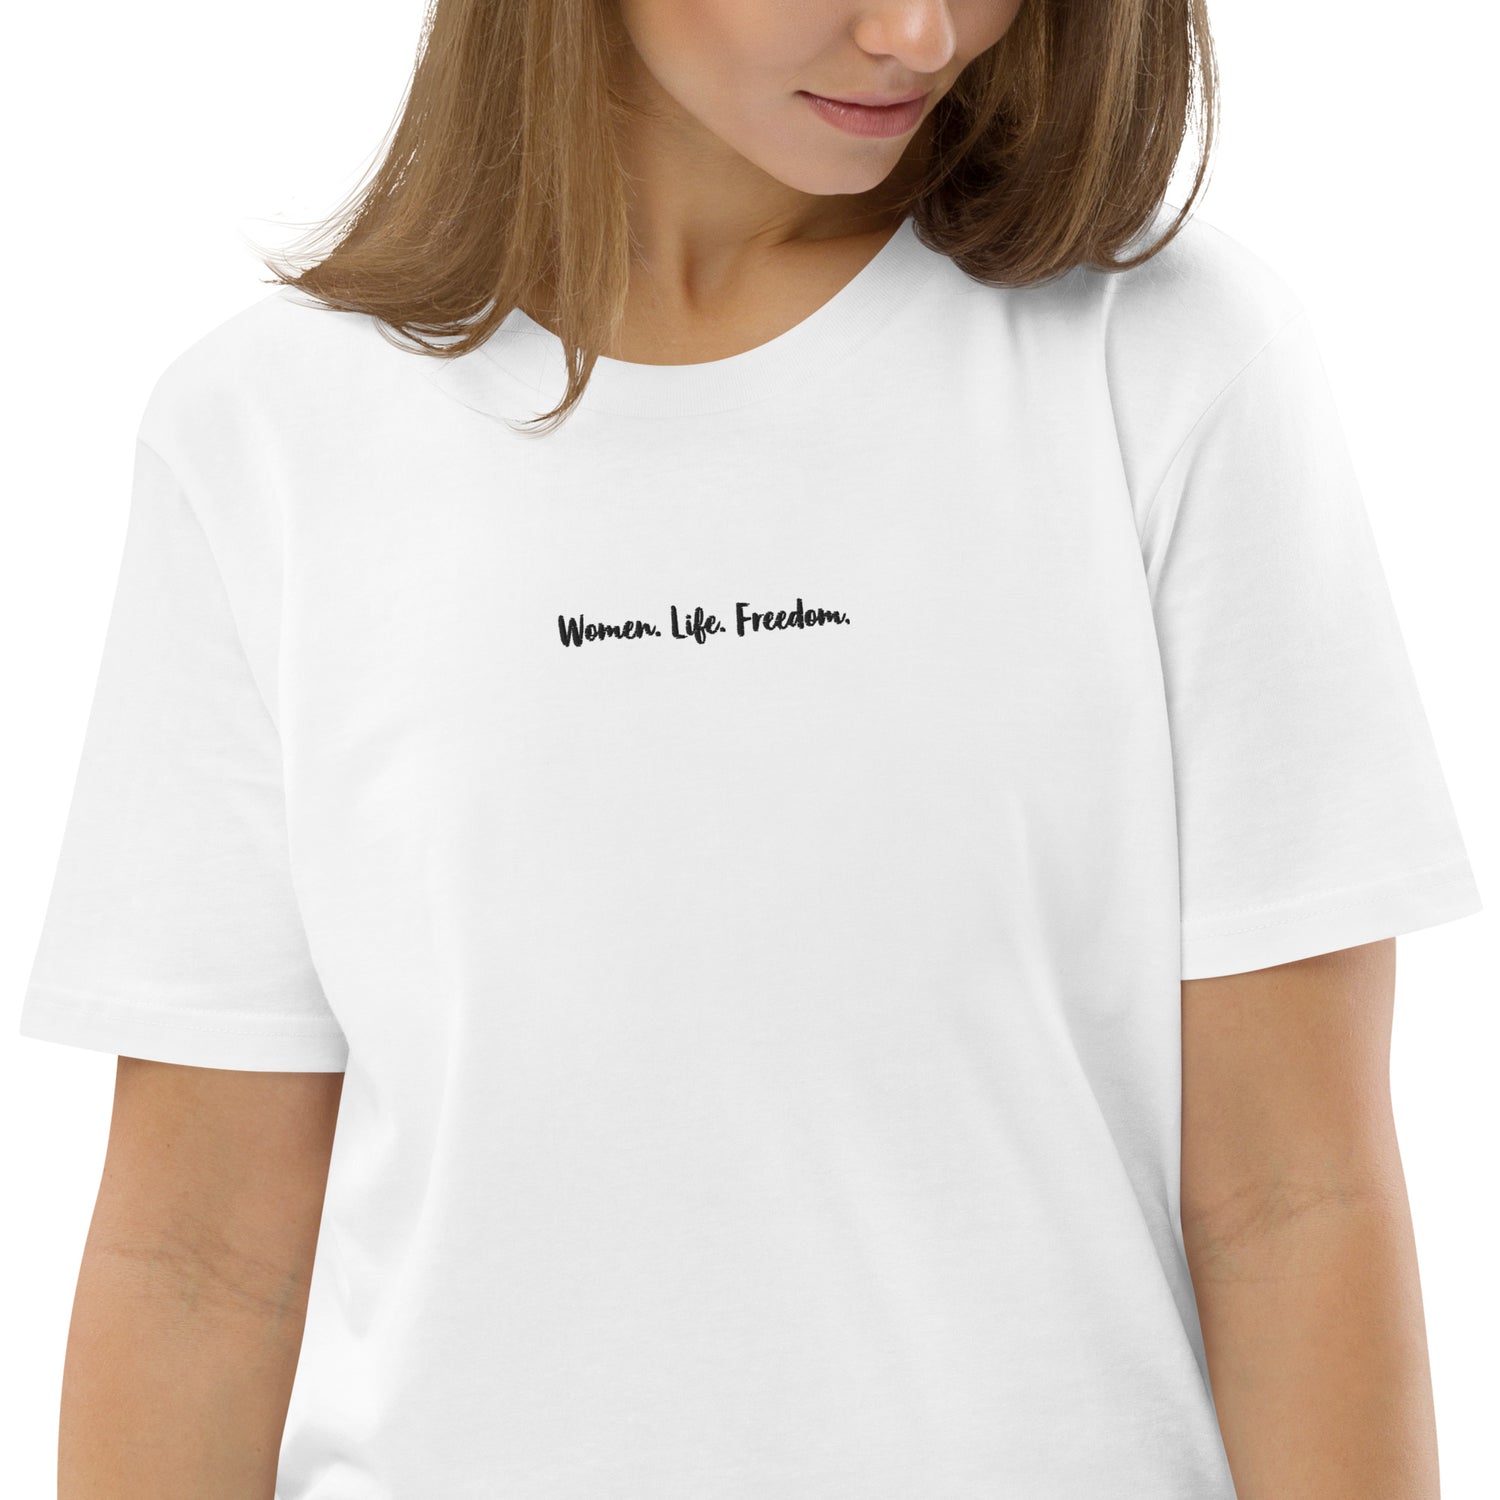 Women. Life. Freedom. T-shirt in White. In support for Women's equal rights